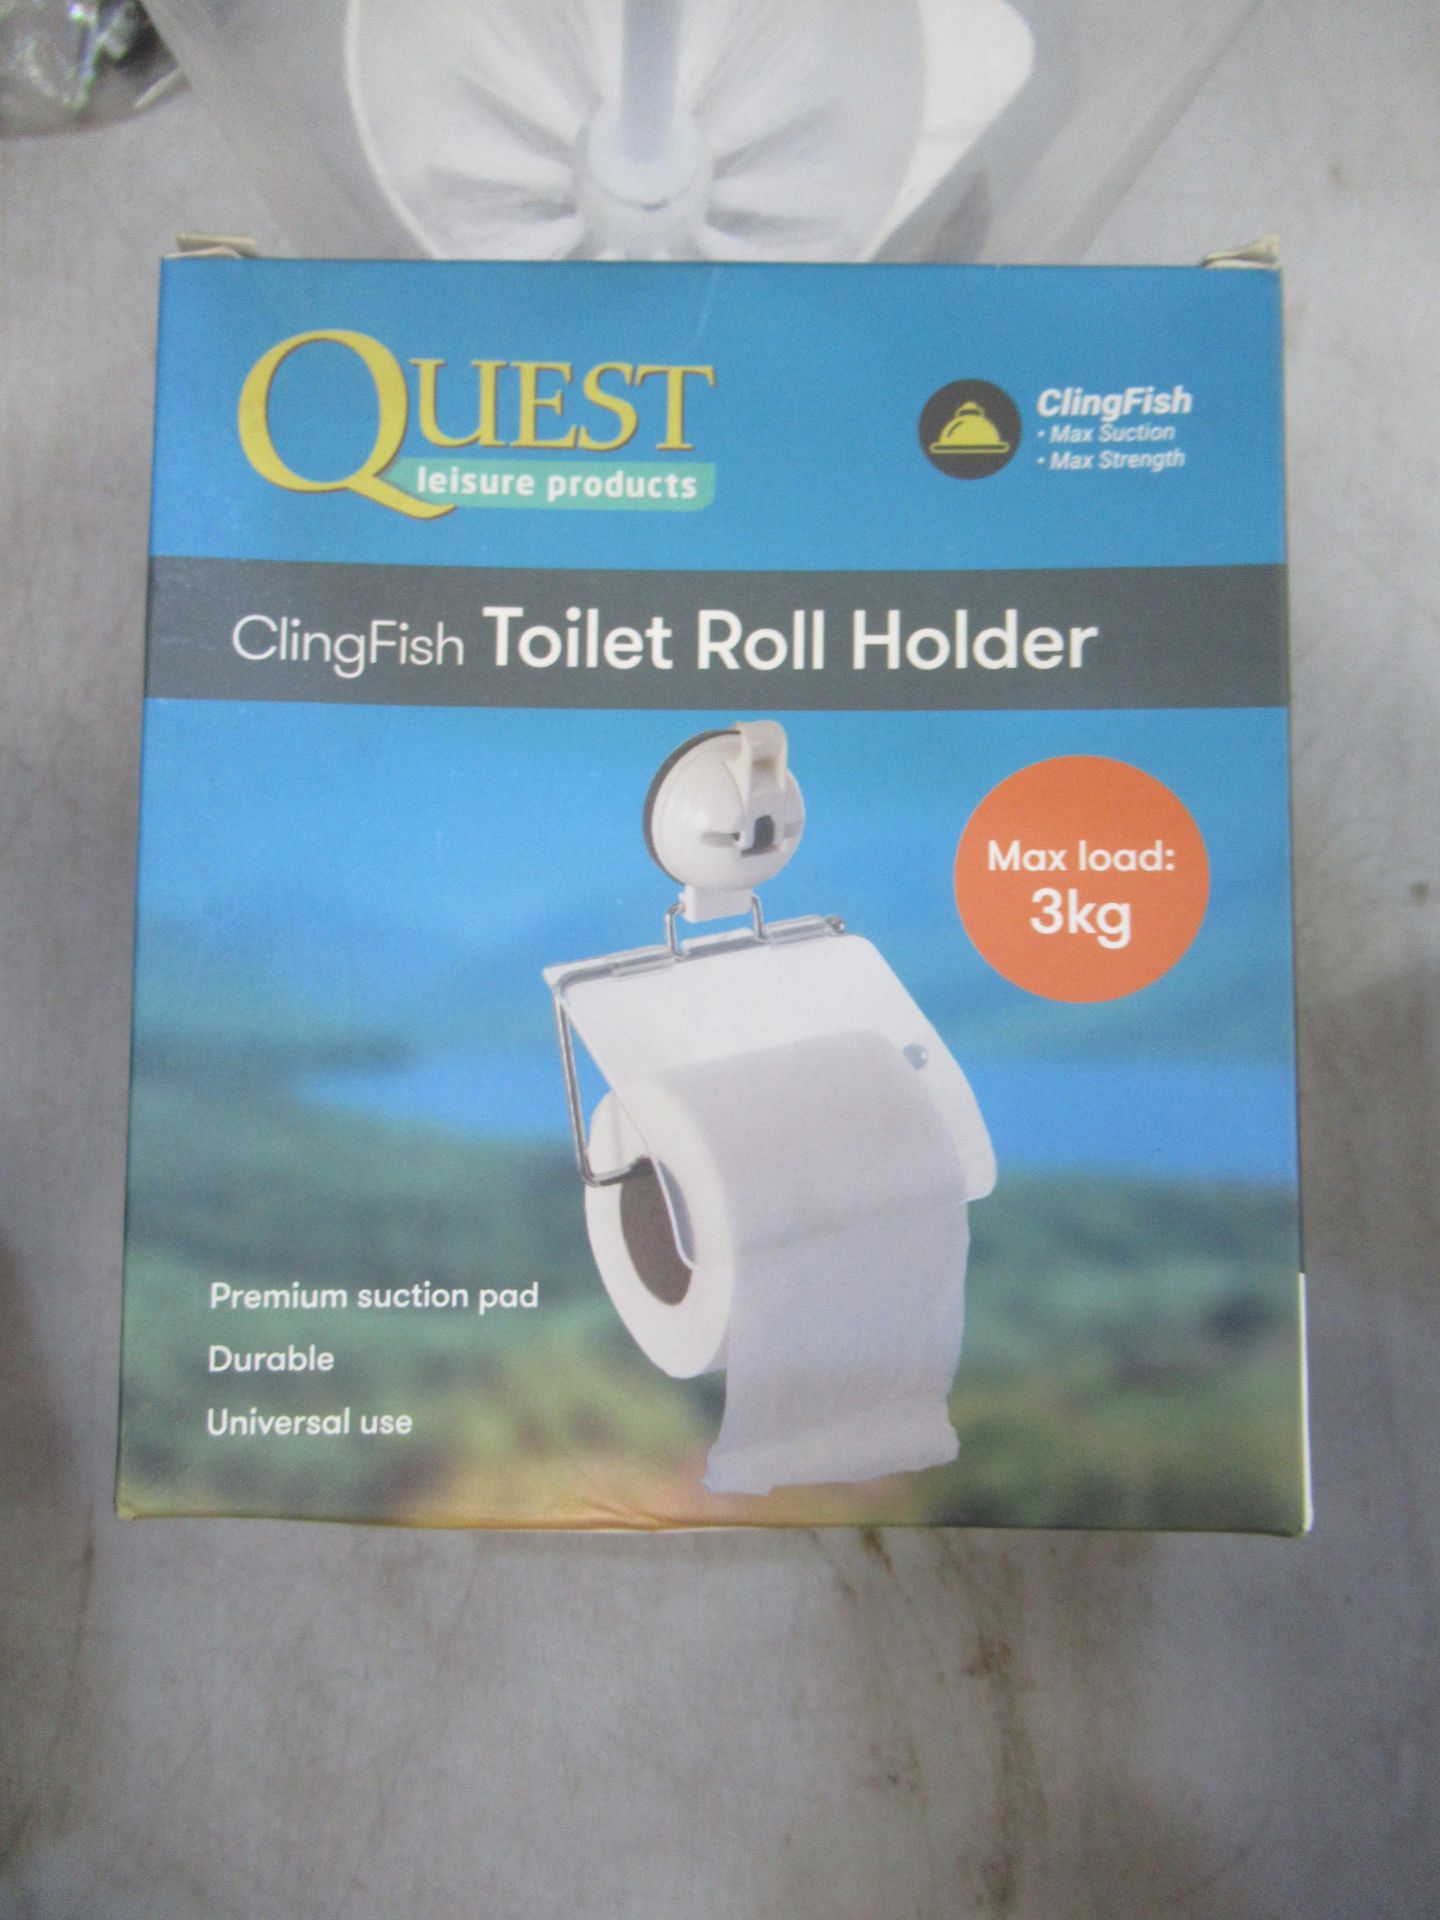 Fiamma Toilet Brush, and 2 x Quest Toilet Roll Holder - Image 2 of 3